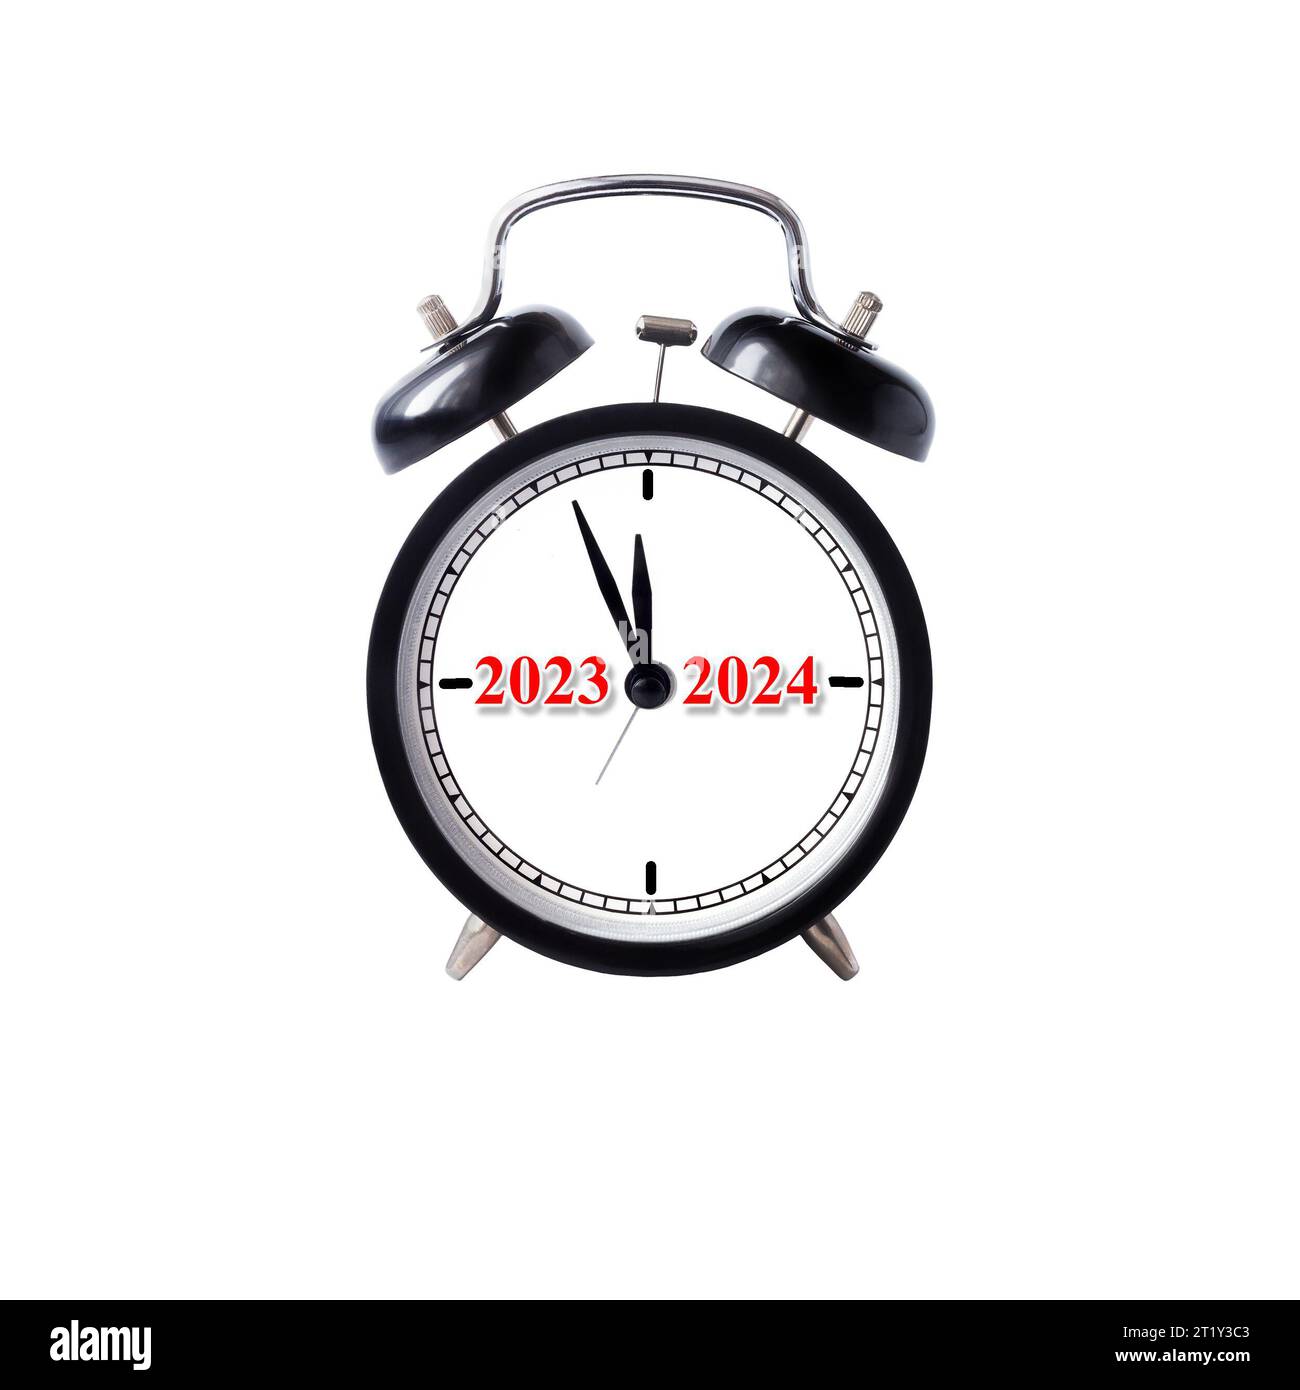 A classic alarm clock with 2023-2024 inscriptions on the dial. New Year concept. Stock Photo